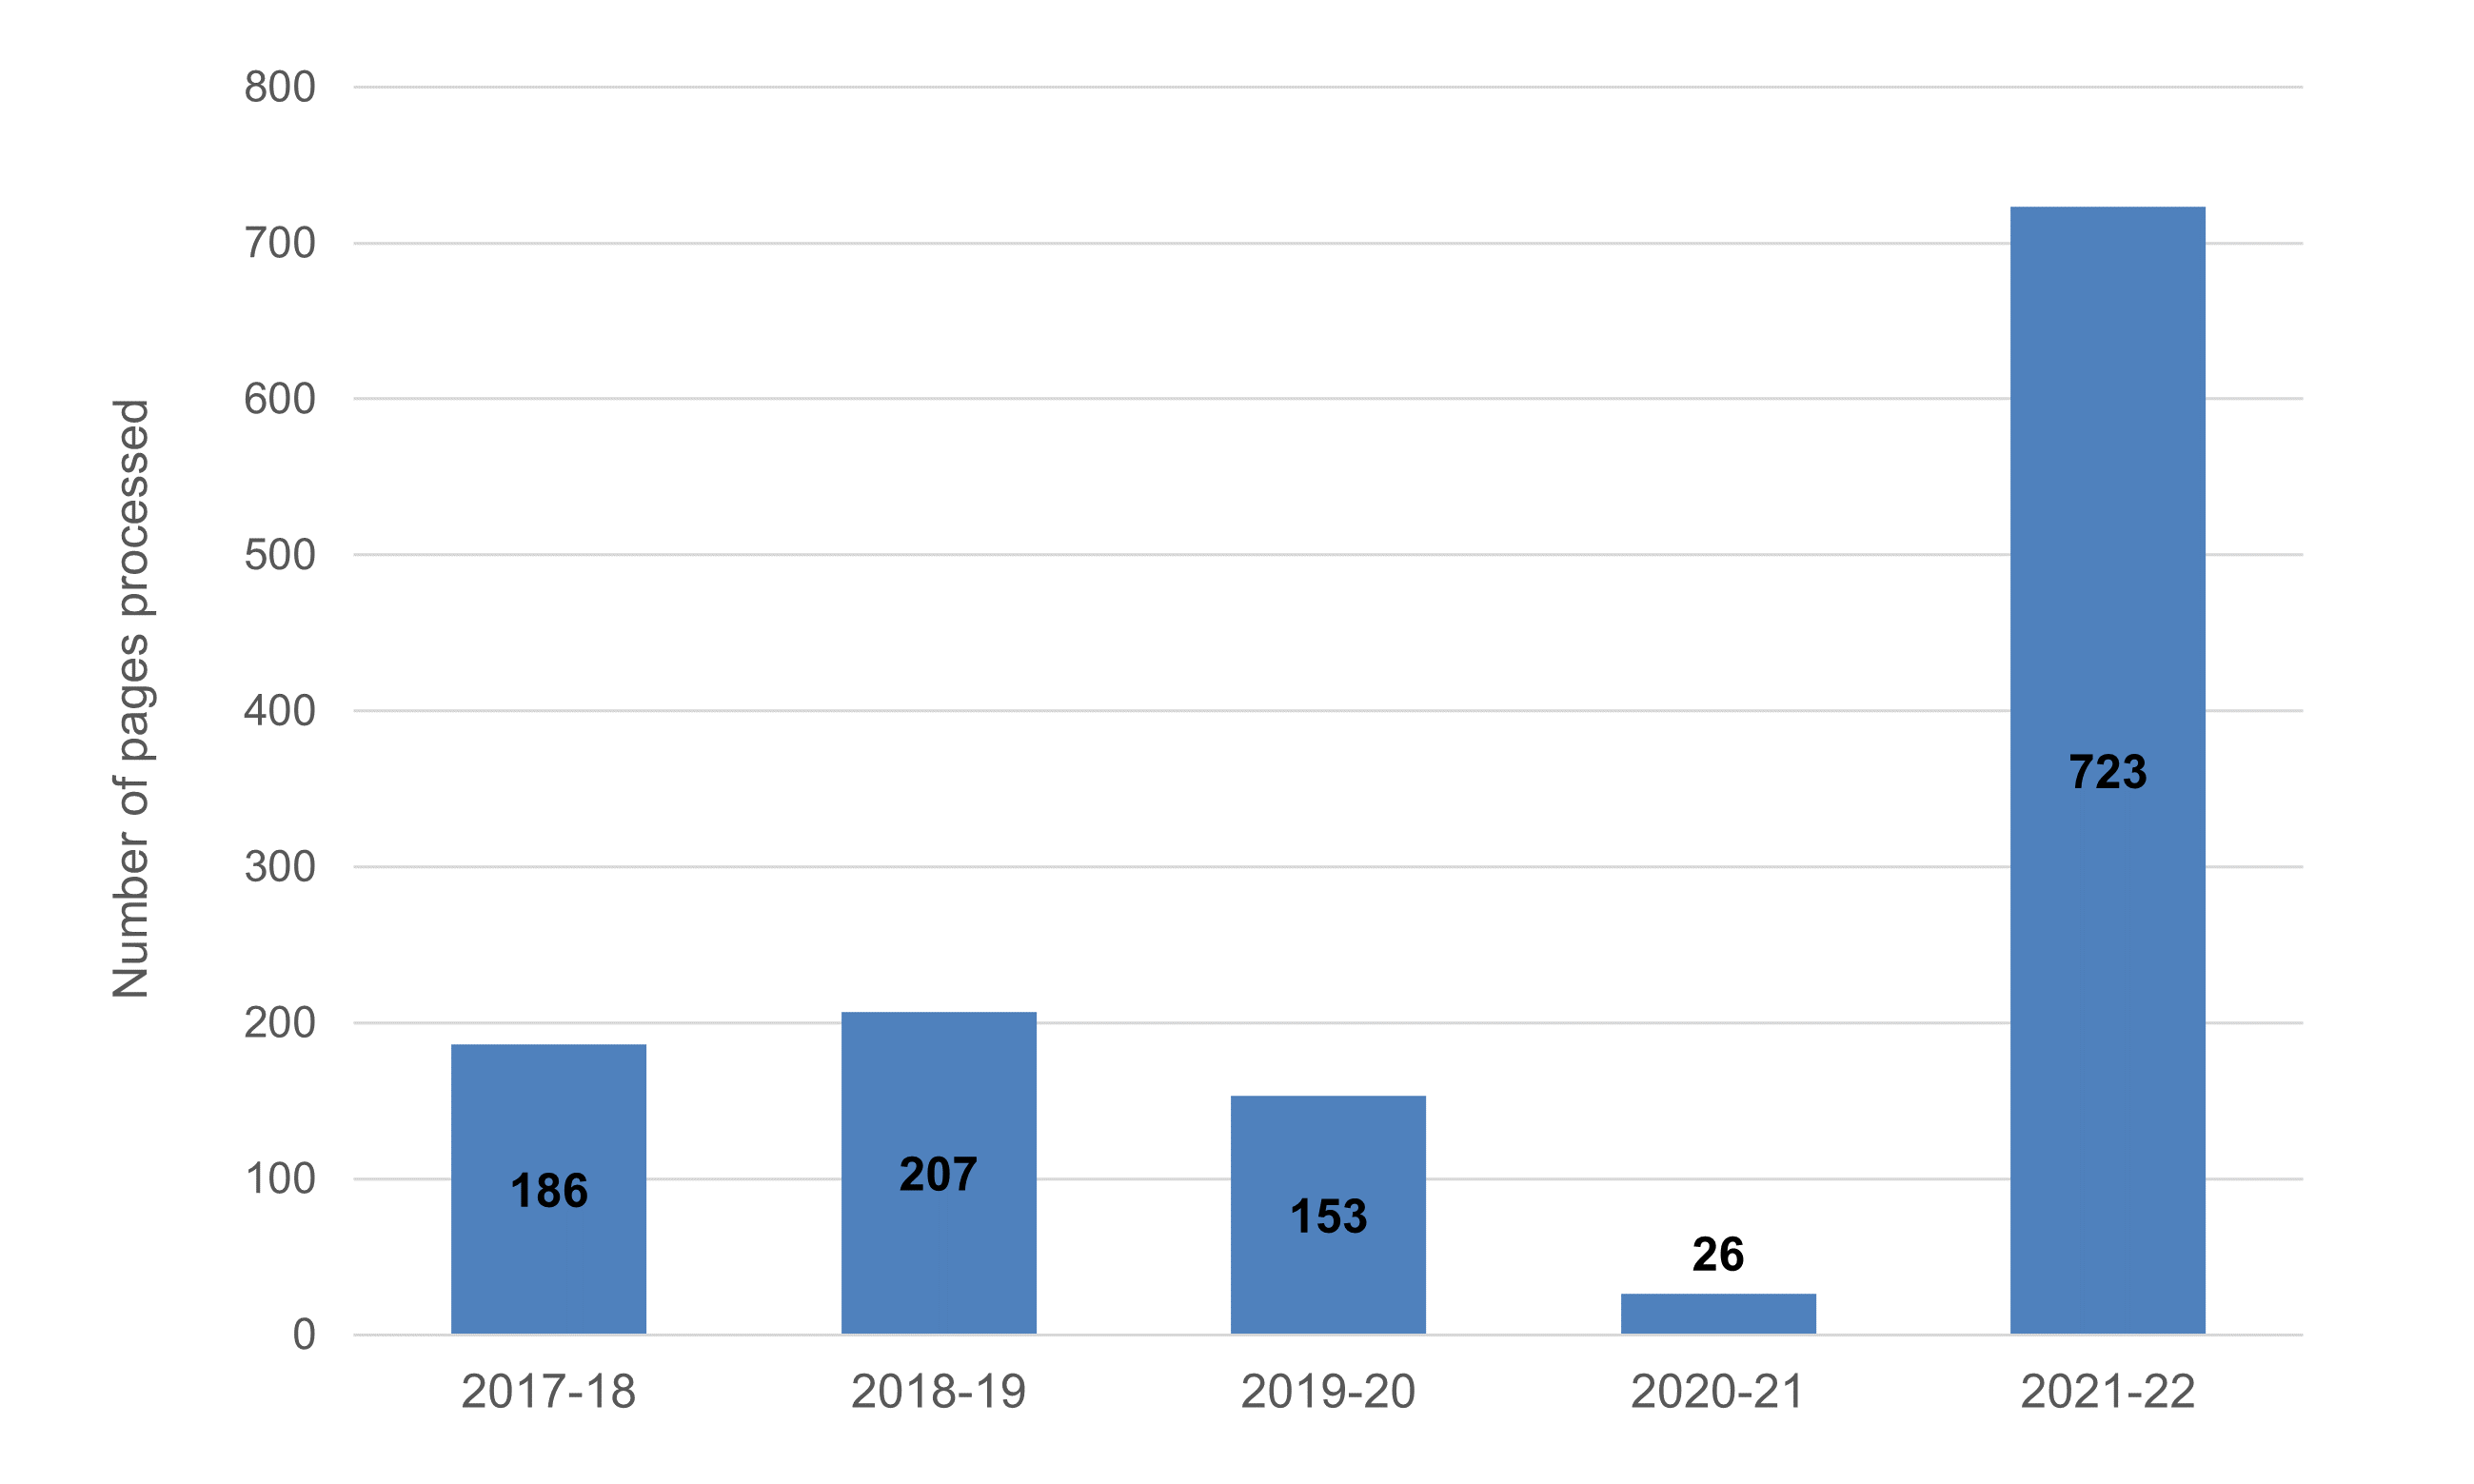 Figure 8: Number of pages processed for ATI consultation requests in 2021-22